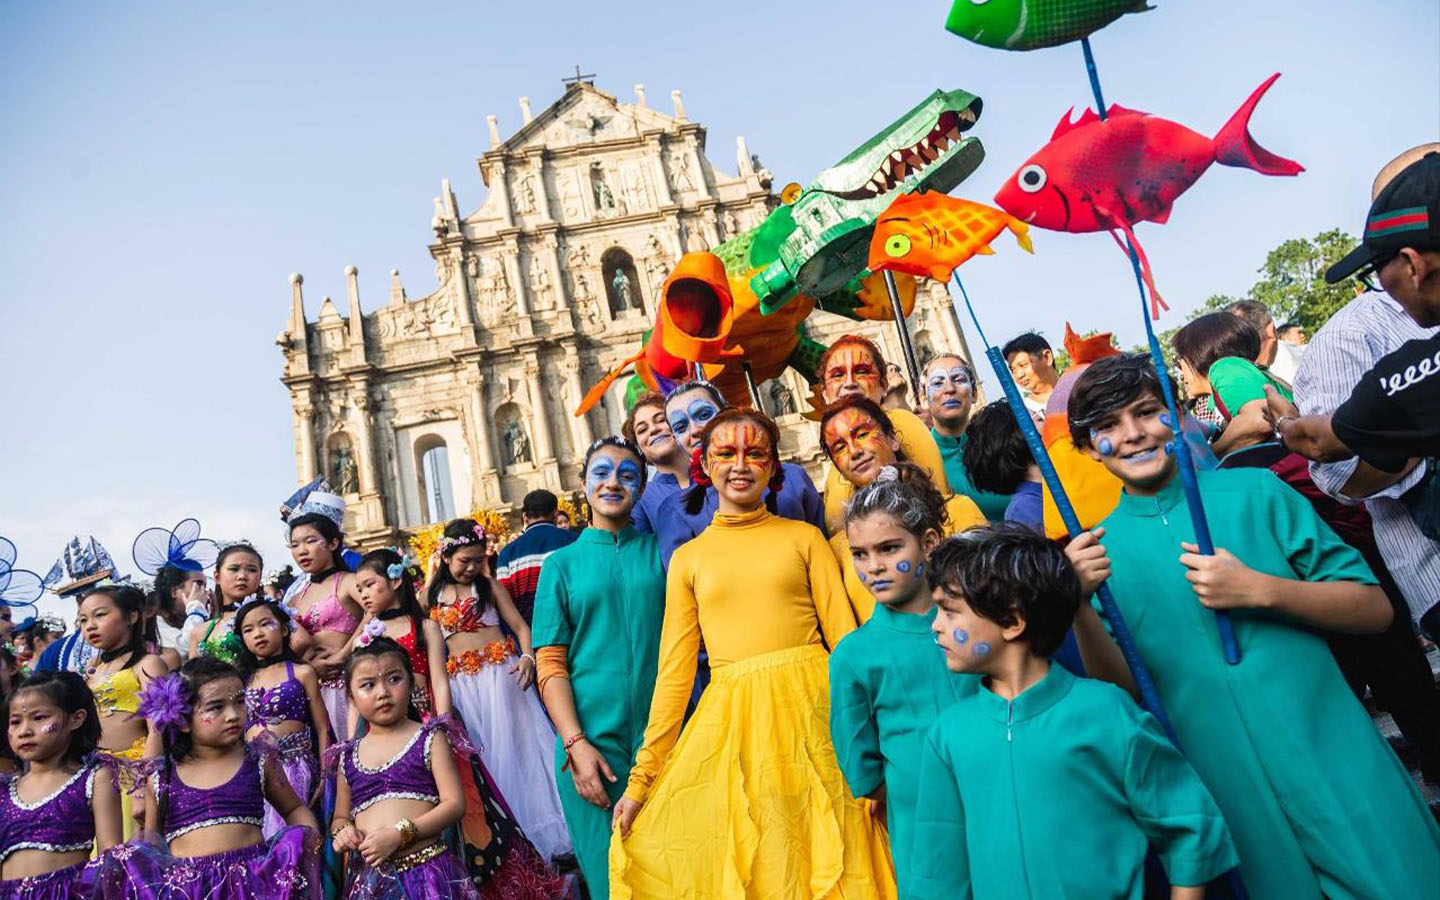 Traffic arrangements announced for Macao International Parade